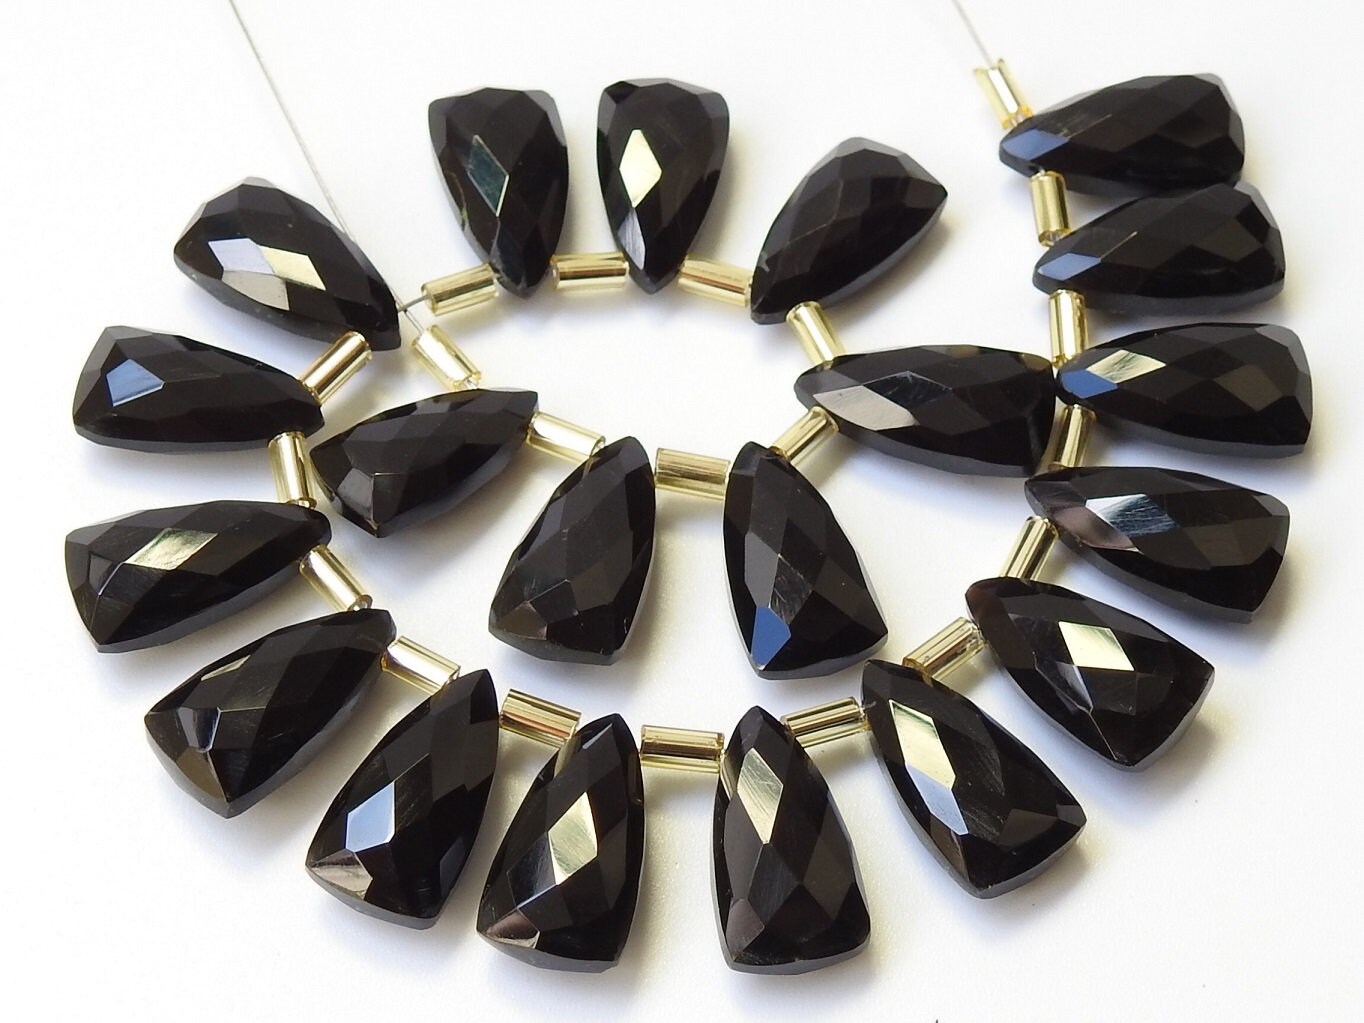 Black Onyx Long Triangle,Trillion,Pyramid,Teardrop,Drop,Briolettes,Faceted,Earrings Pair,Wholesale Price,New Arrival 15X8MM Approx PME-CY2 | Save 33% - Rajasthan Living 15